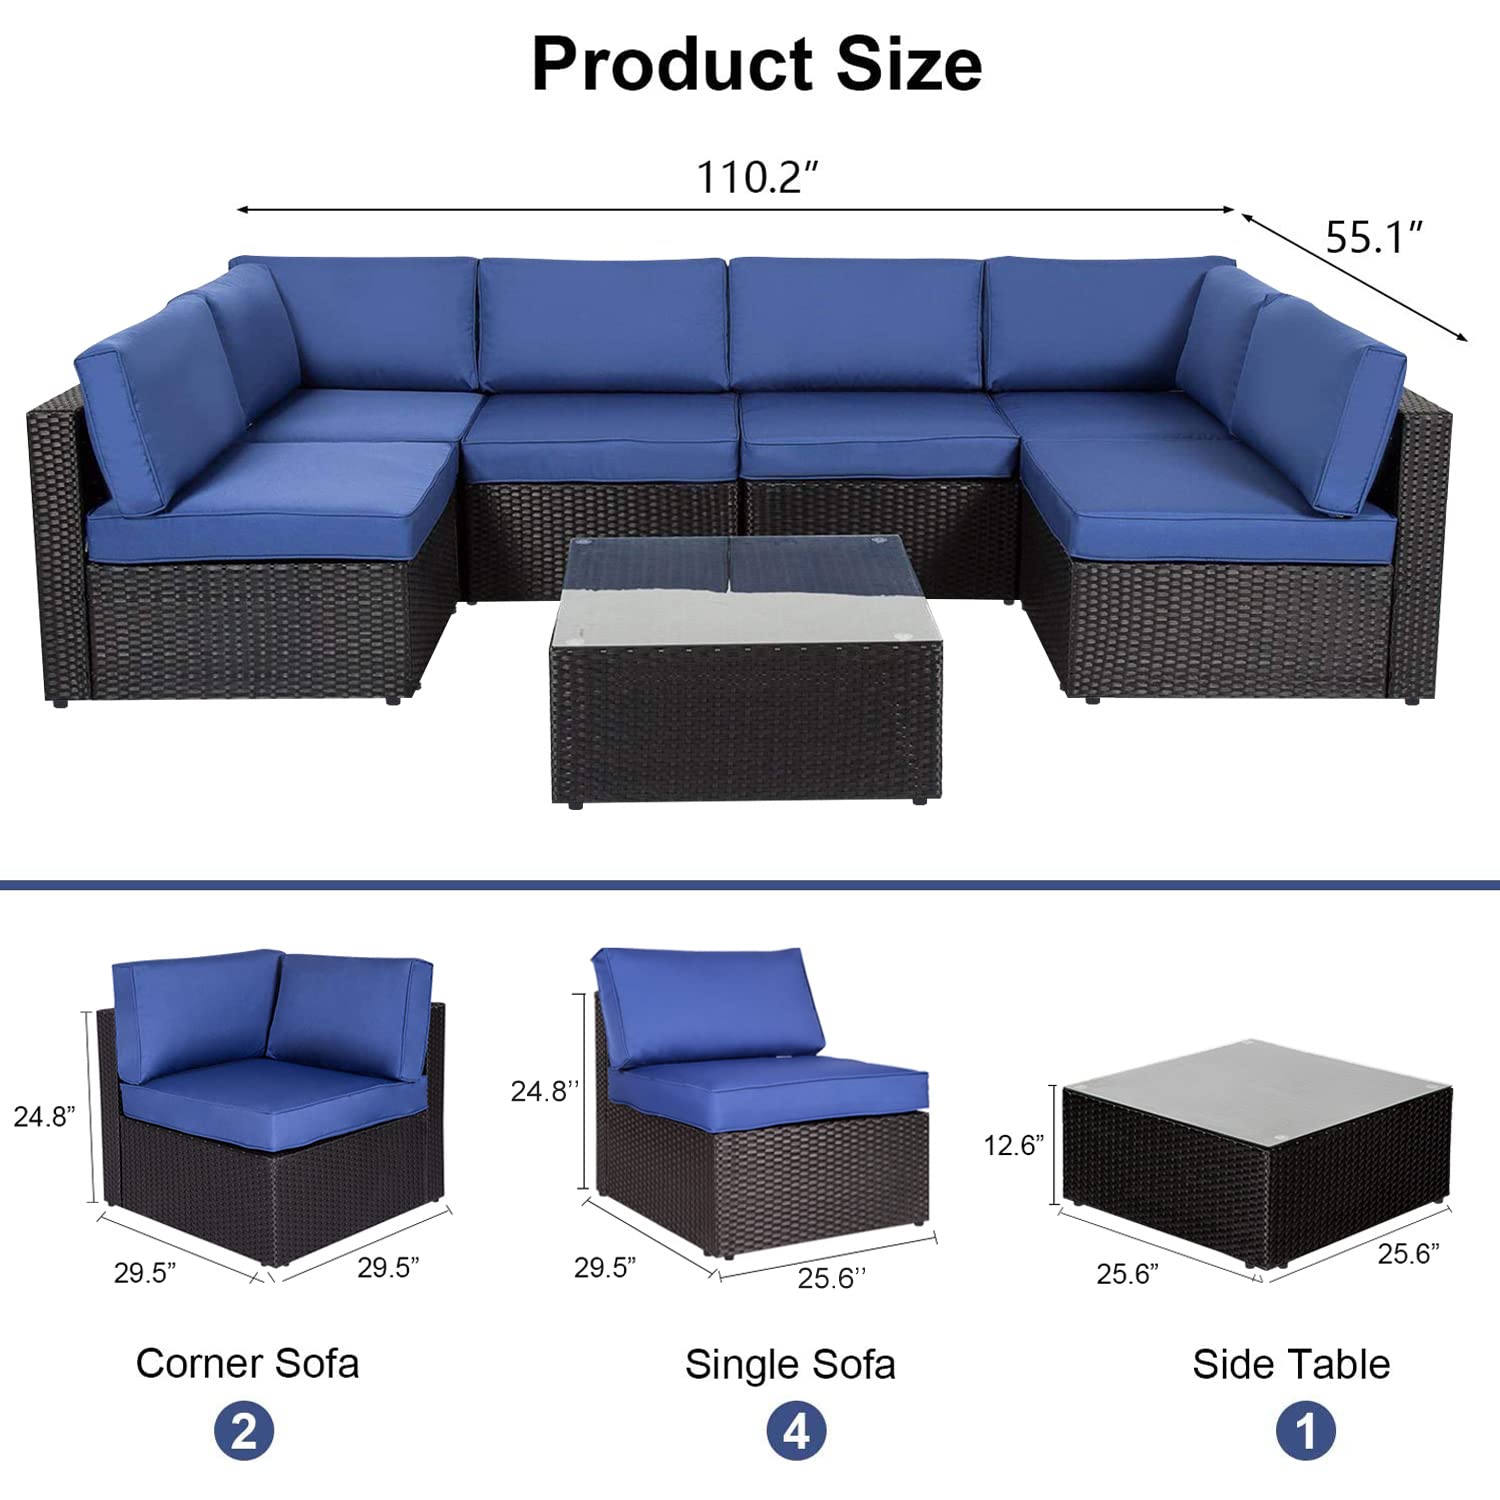 kinbor Patio Furniture - Outdoor Sectional Sofa, 7 Piece Wicker Outdoor Couch Rattan Conversation Set with Thickened Cushions and Glass Coffee Table